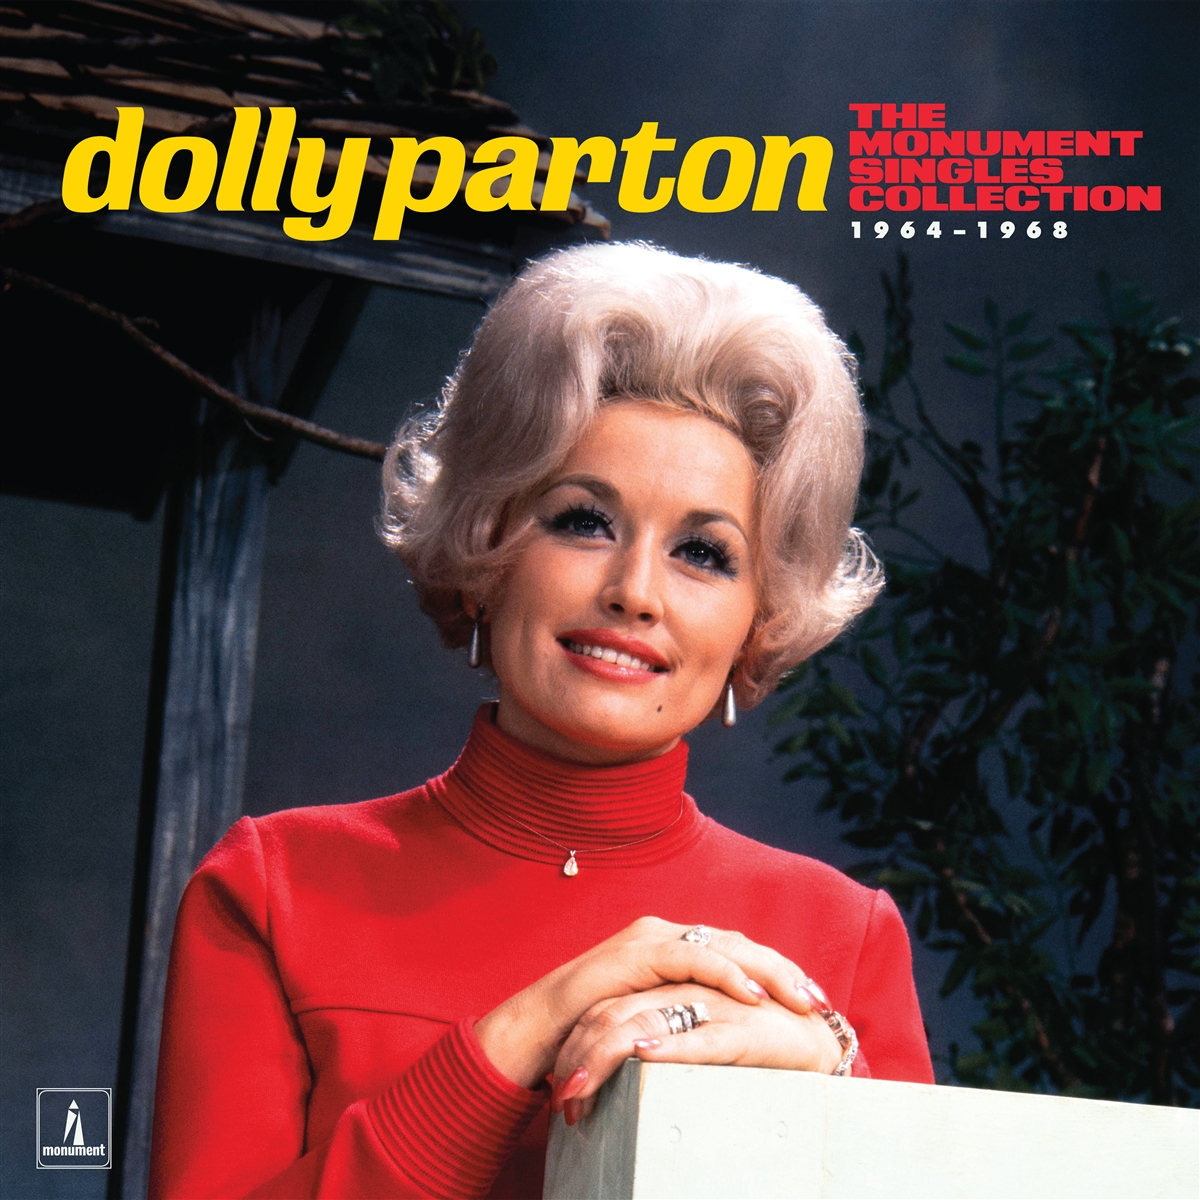 PARTON, DOLLY - THE MONUMENT SINGLES COLLECTION 1964/1968 - LP